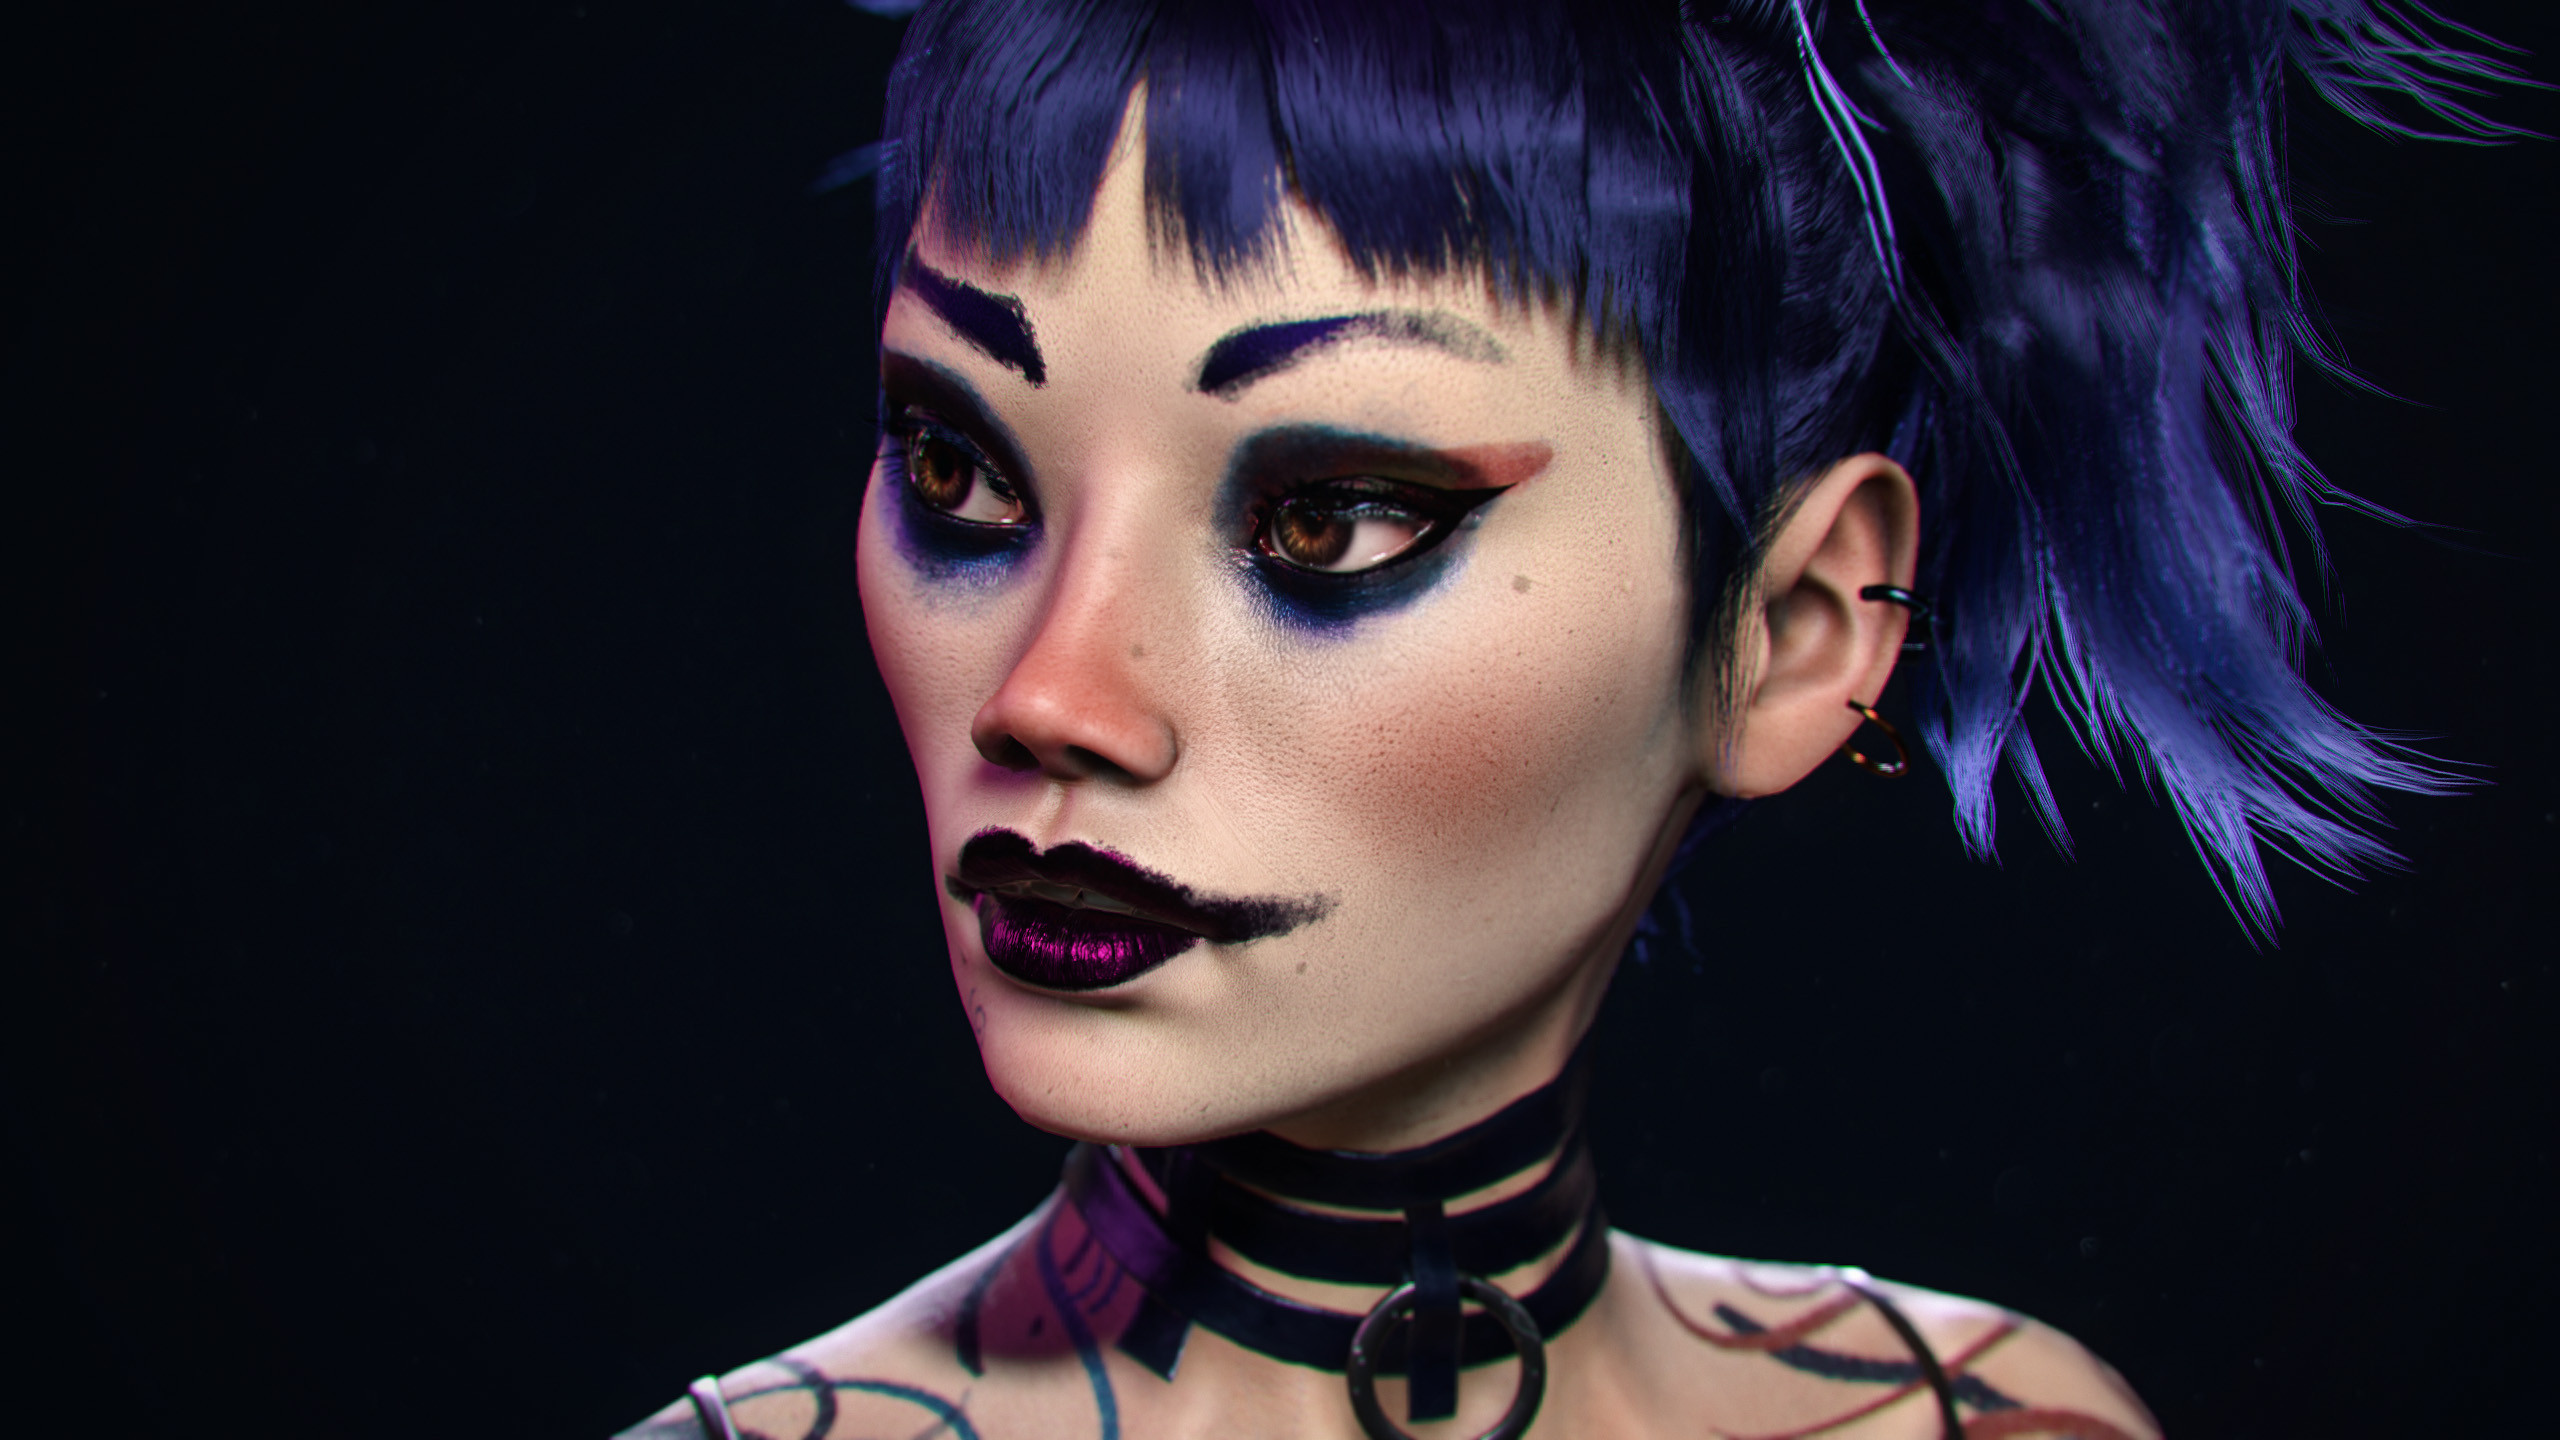 suge mangel gave Love, Death & Robots Fan Art: Creating the Character from The Witness